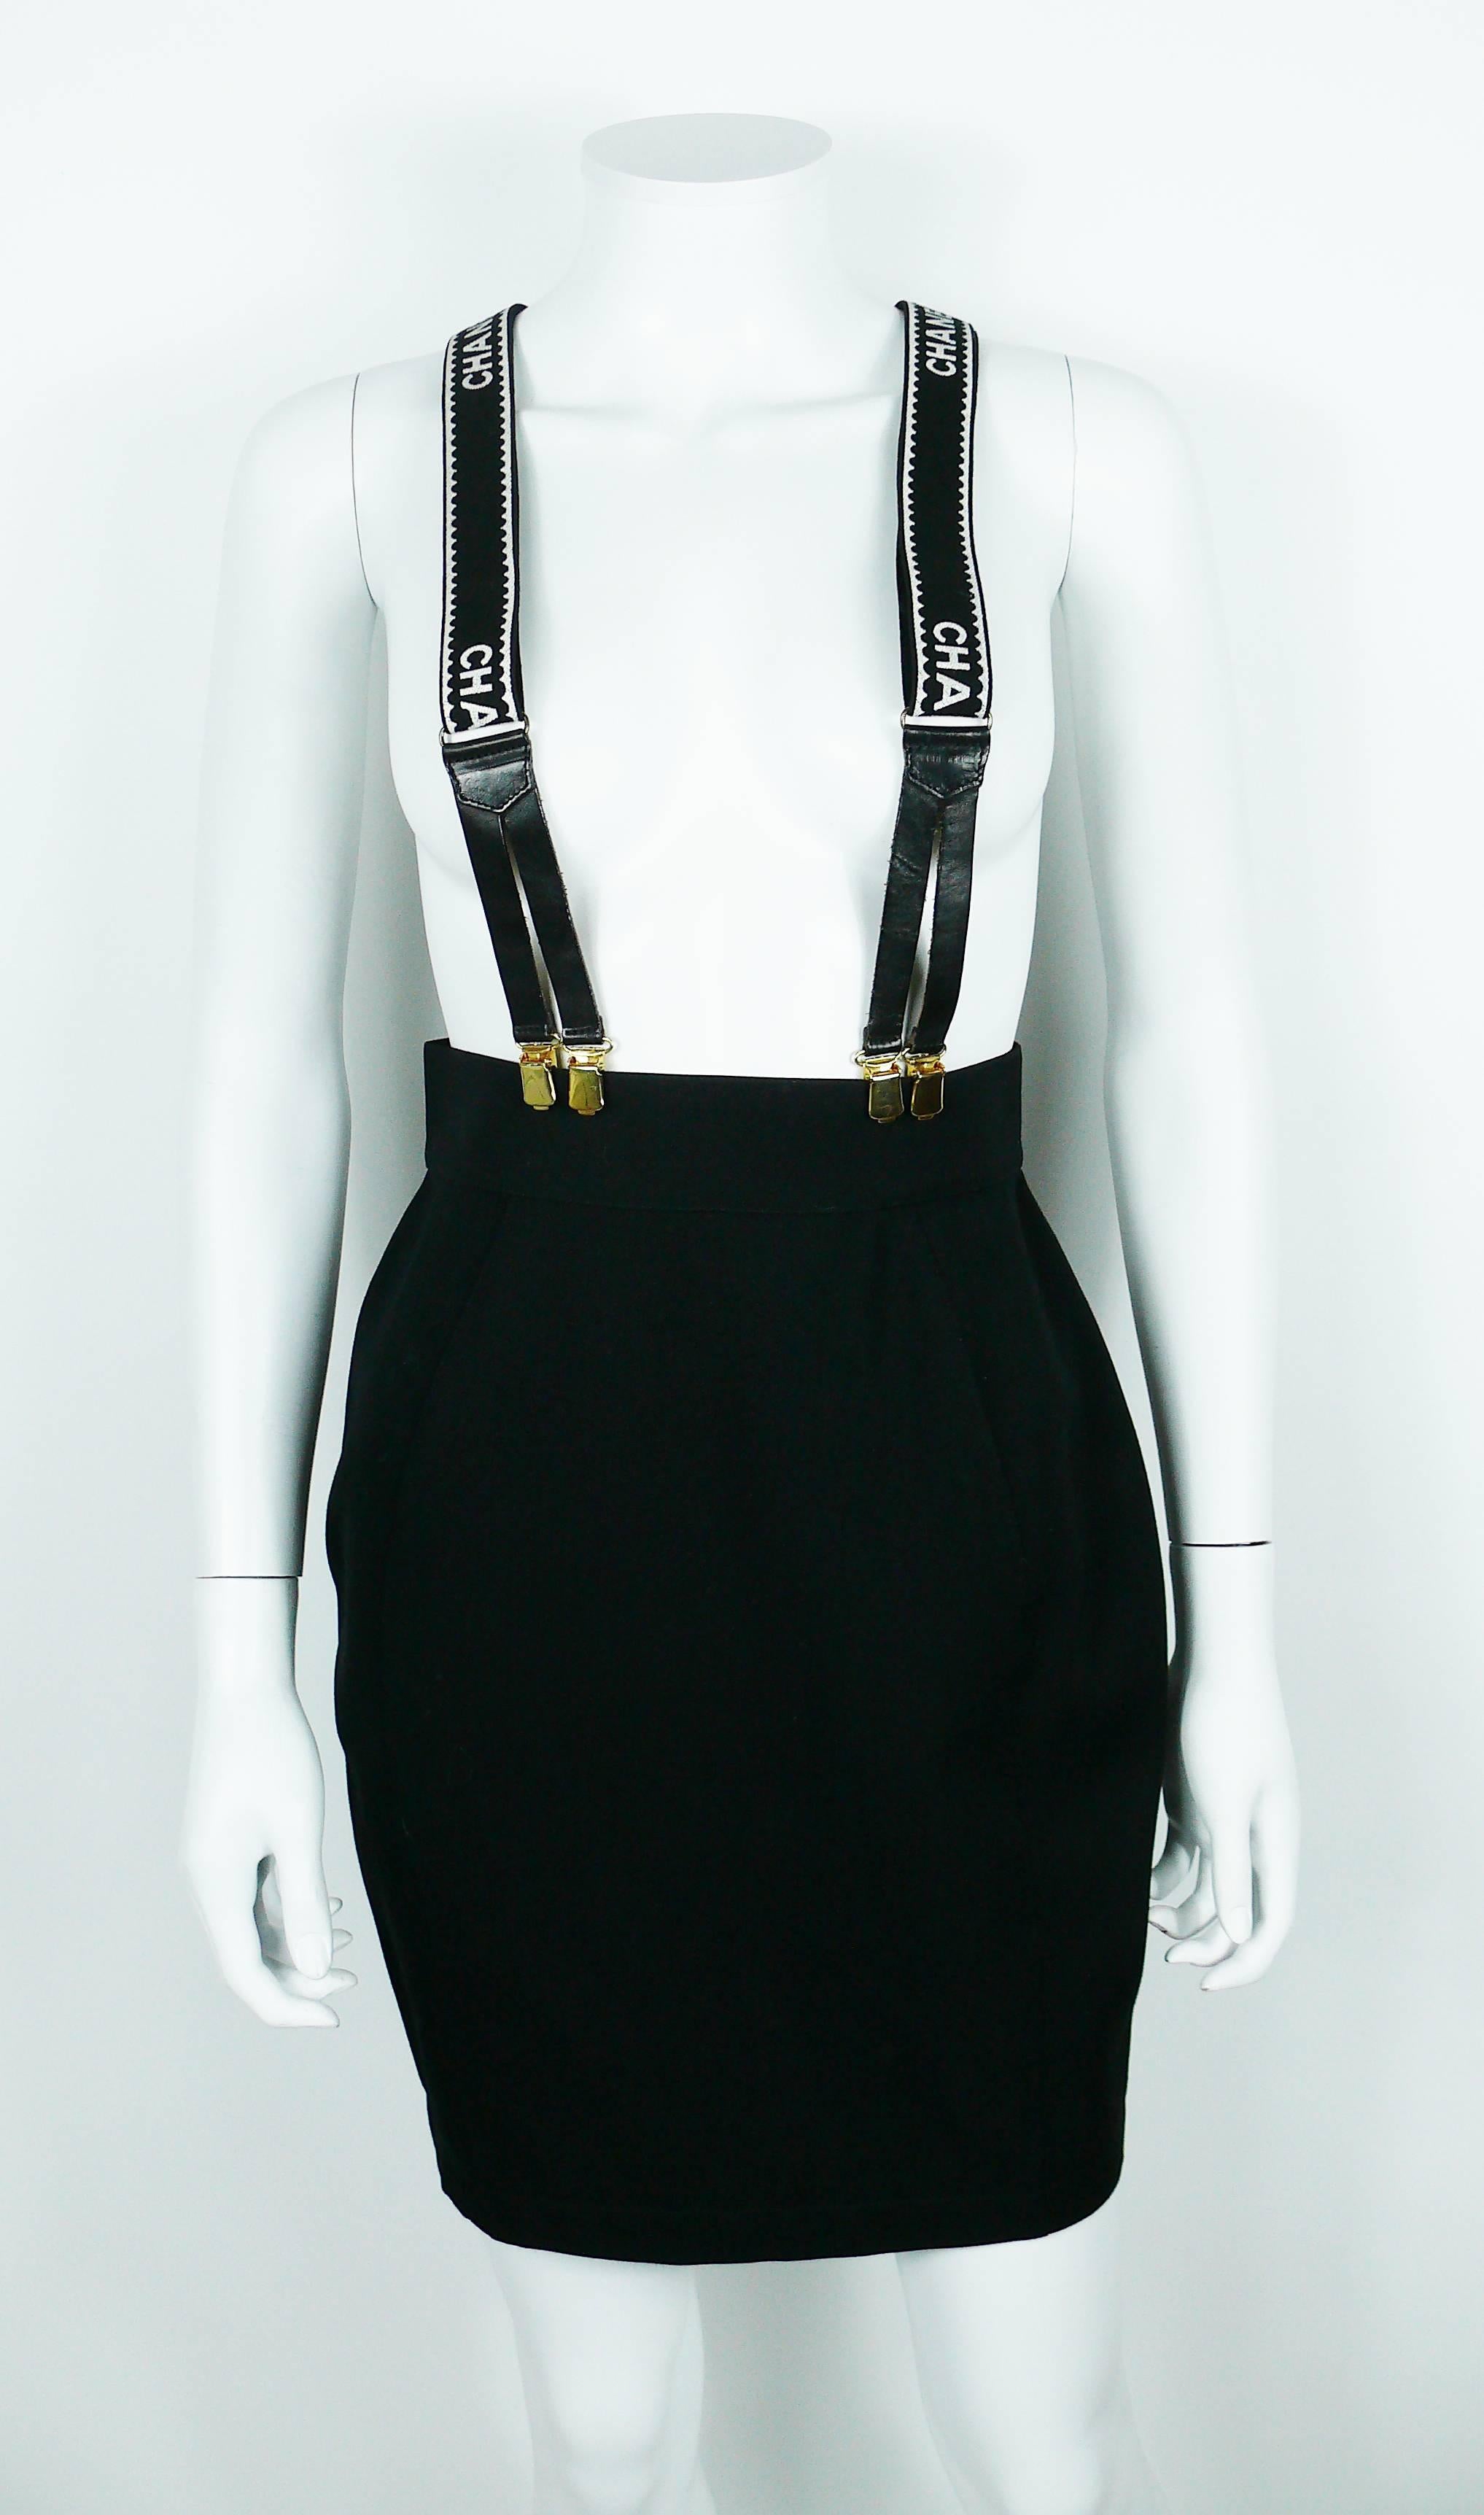 Chanel vintage iconic rare suspenders in black version with white printed lettering, gold toned hardware and leather trim.

CC logo printed on the leather.
Label "Fabriqué en France" (Made in France) on the reverse.

These iconic